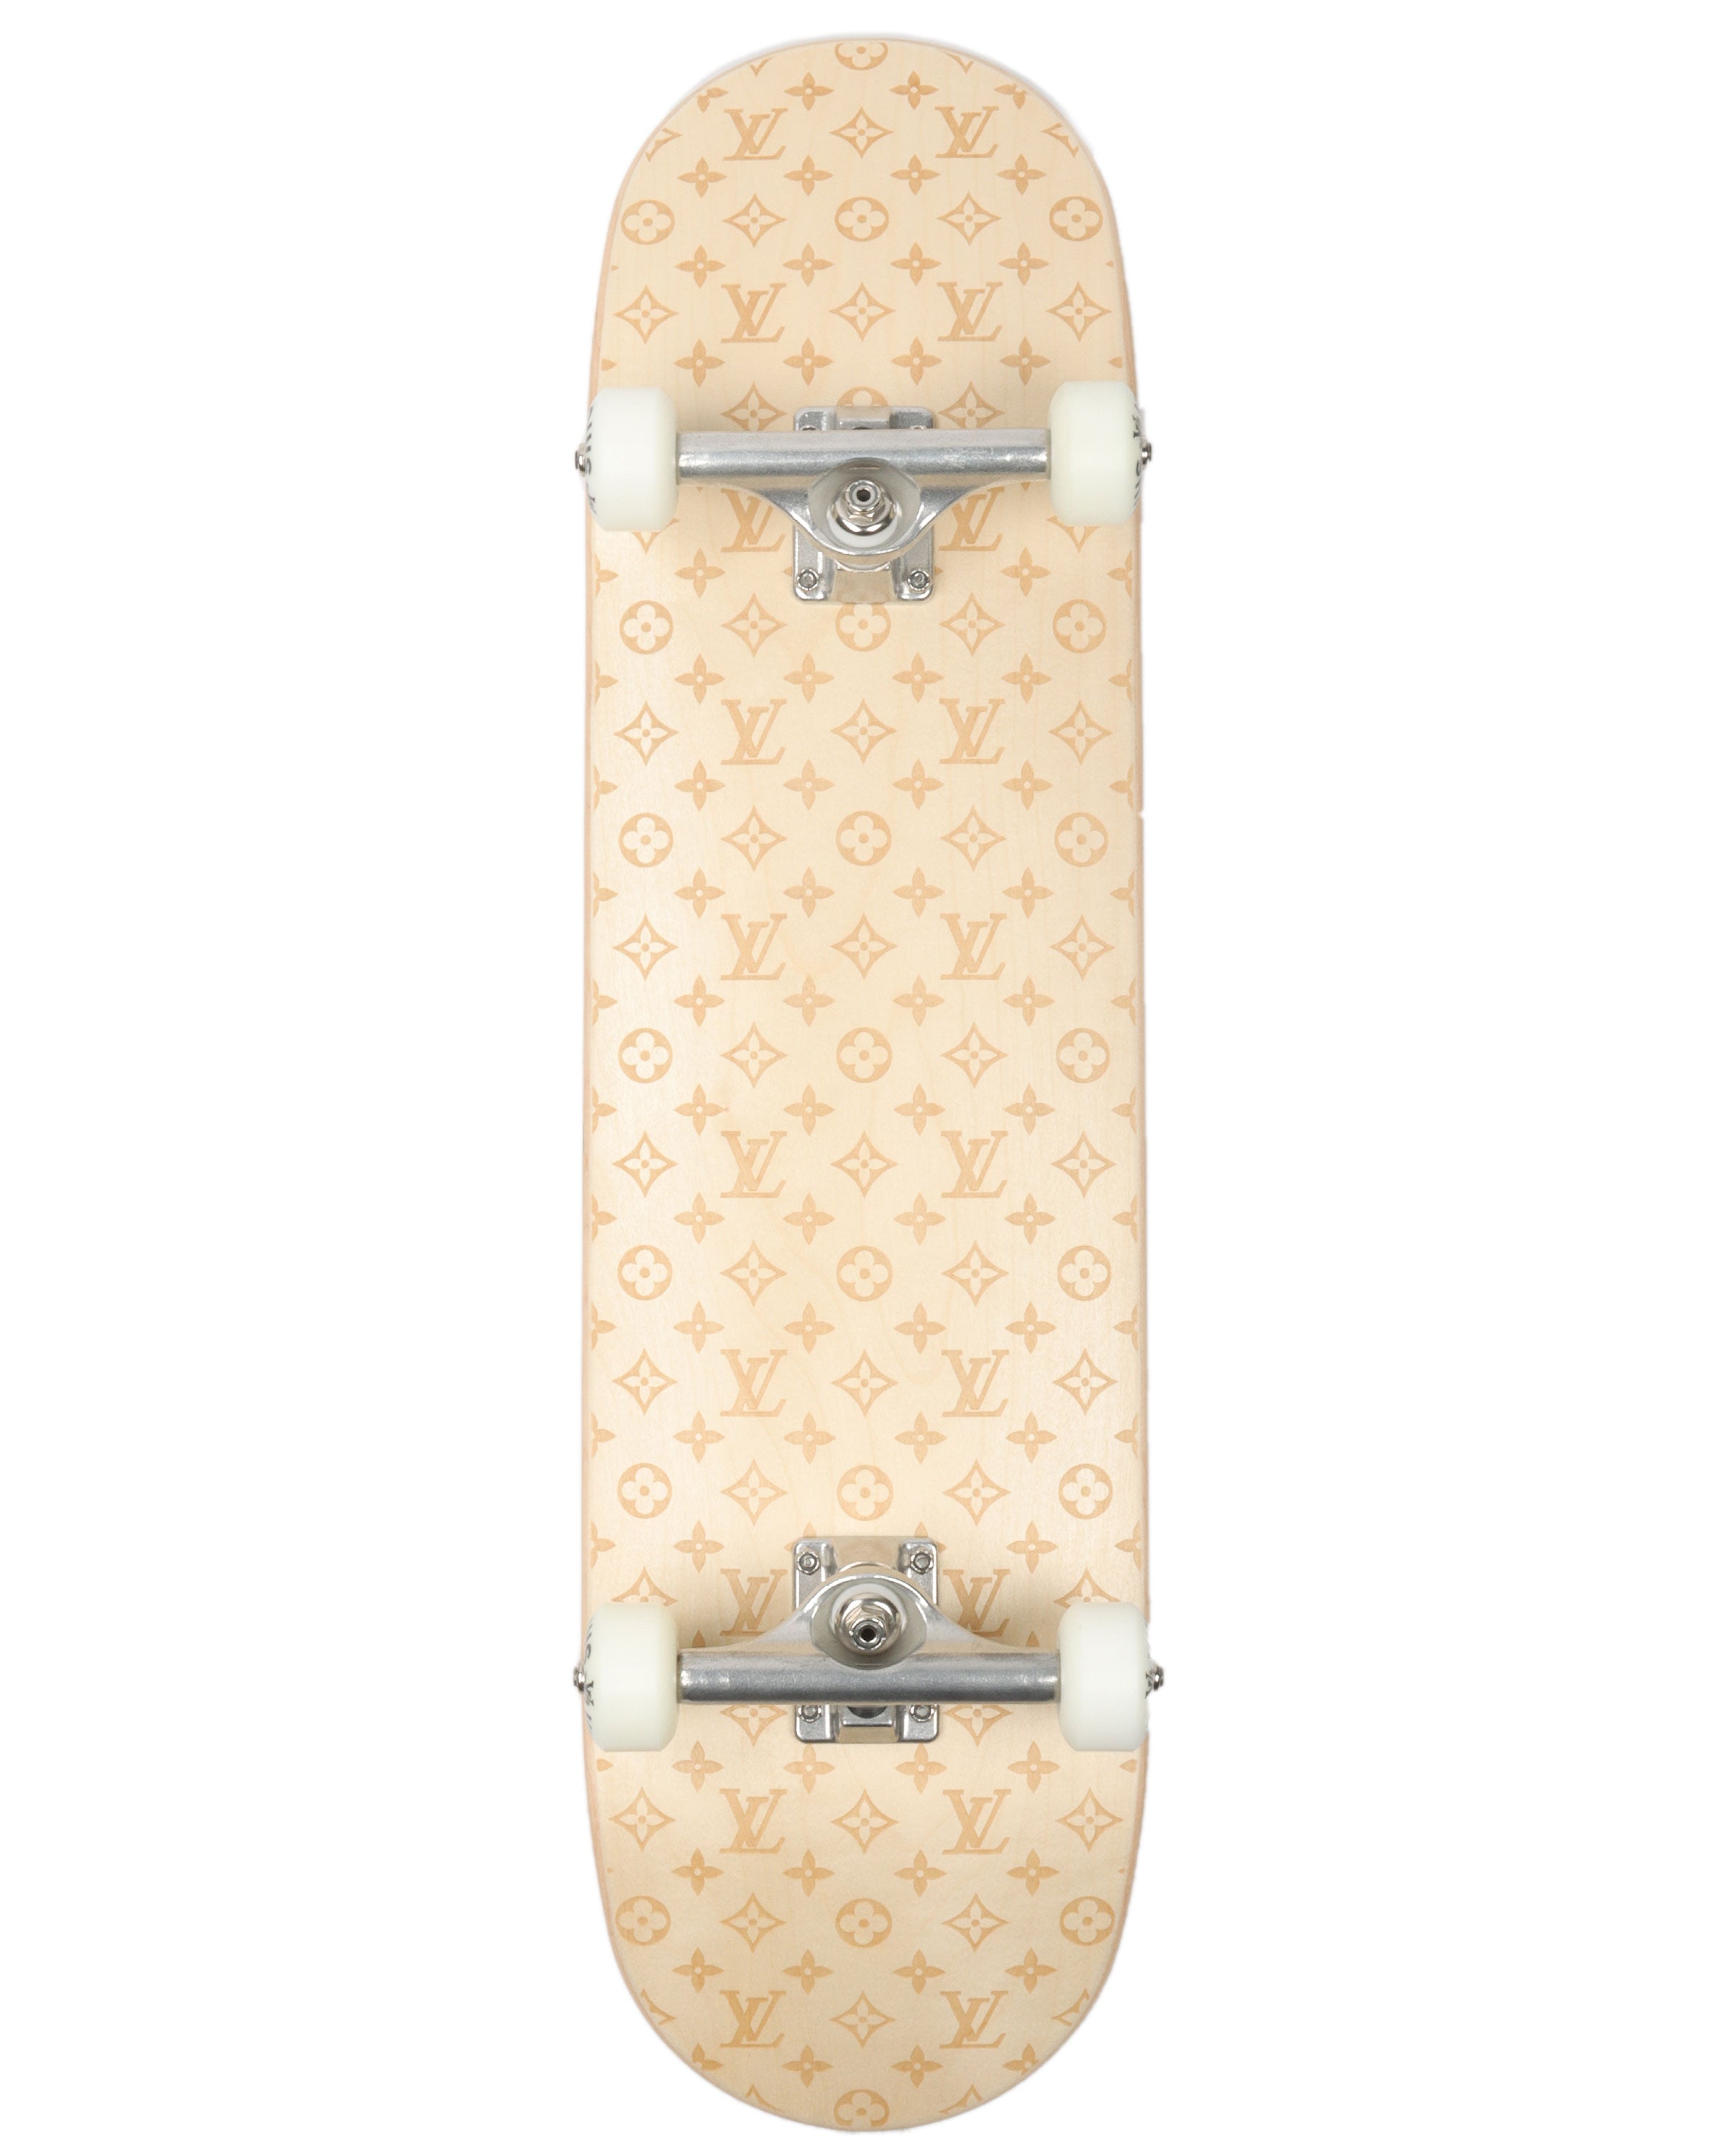 $150,000 SUPREME X LOUIS VUITTON SKATEBOARD!!! - User Submitted by